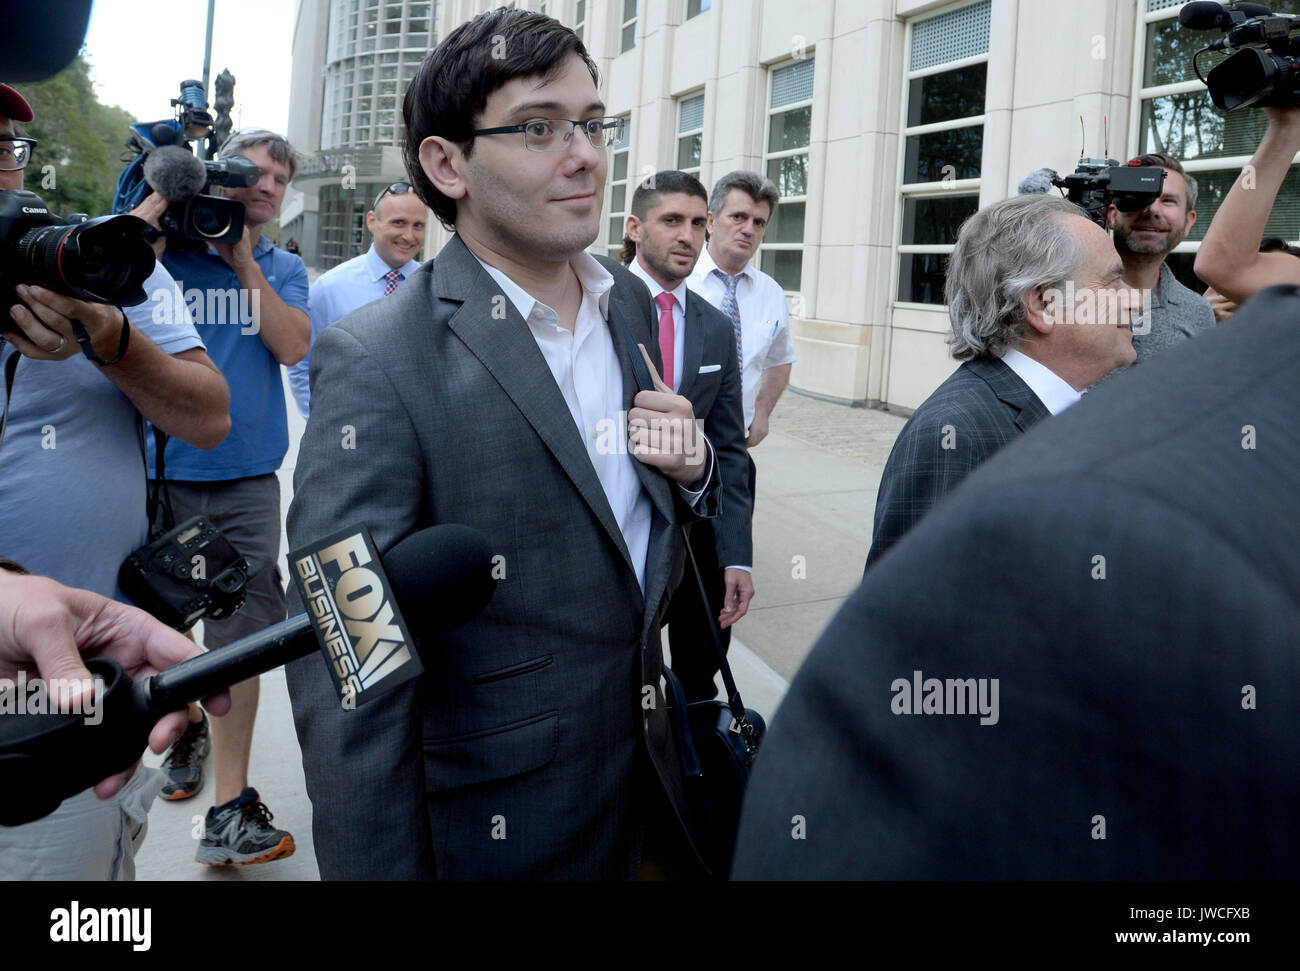 NEW YORK, NY - AUGUST 3: Former Turing Pharmaceuticals CEO Martin Shkreli smiles as he exits the United States Federal courthouse after day four of deliberations in his federal securities fraud trial on August 3, 2017 in New York City. Credit: Dennis Van Tine/MediaPunch Stock Photo